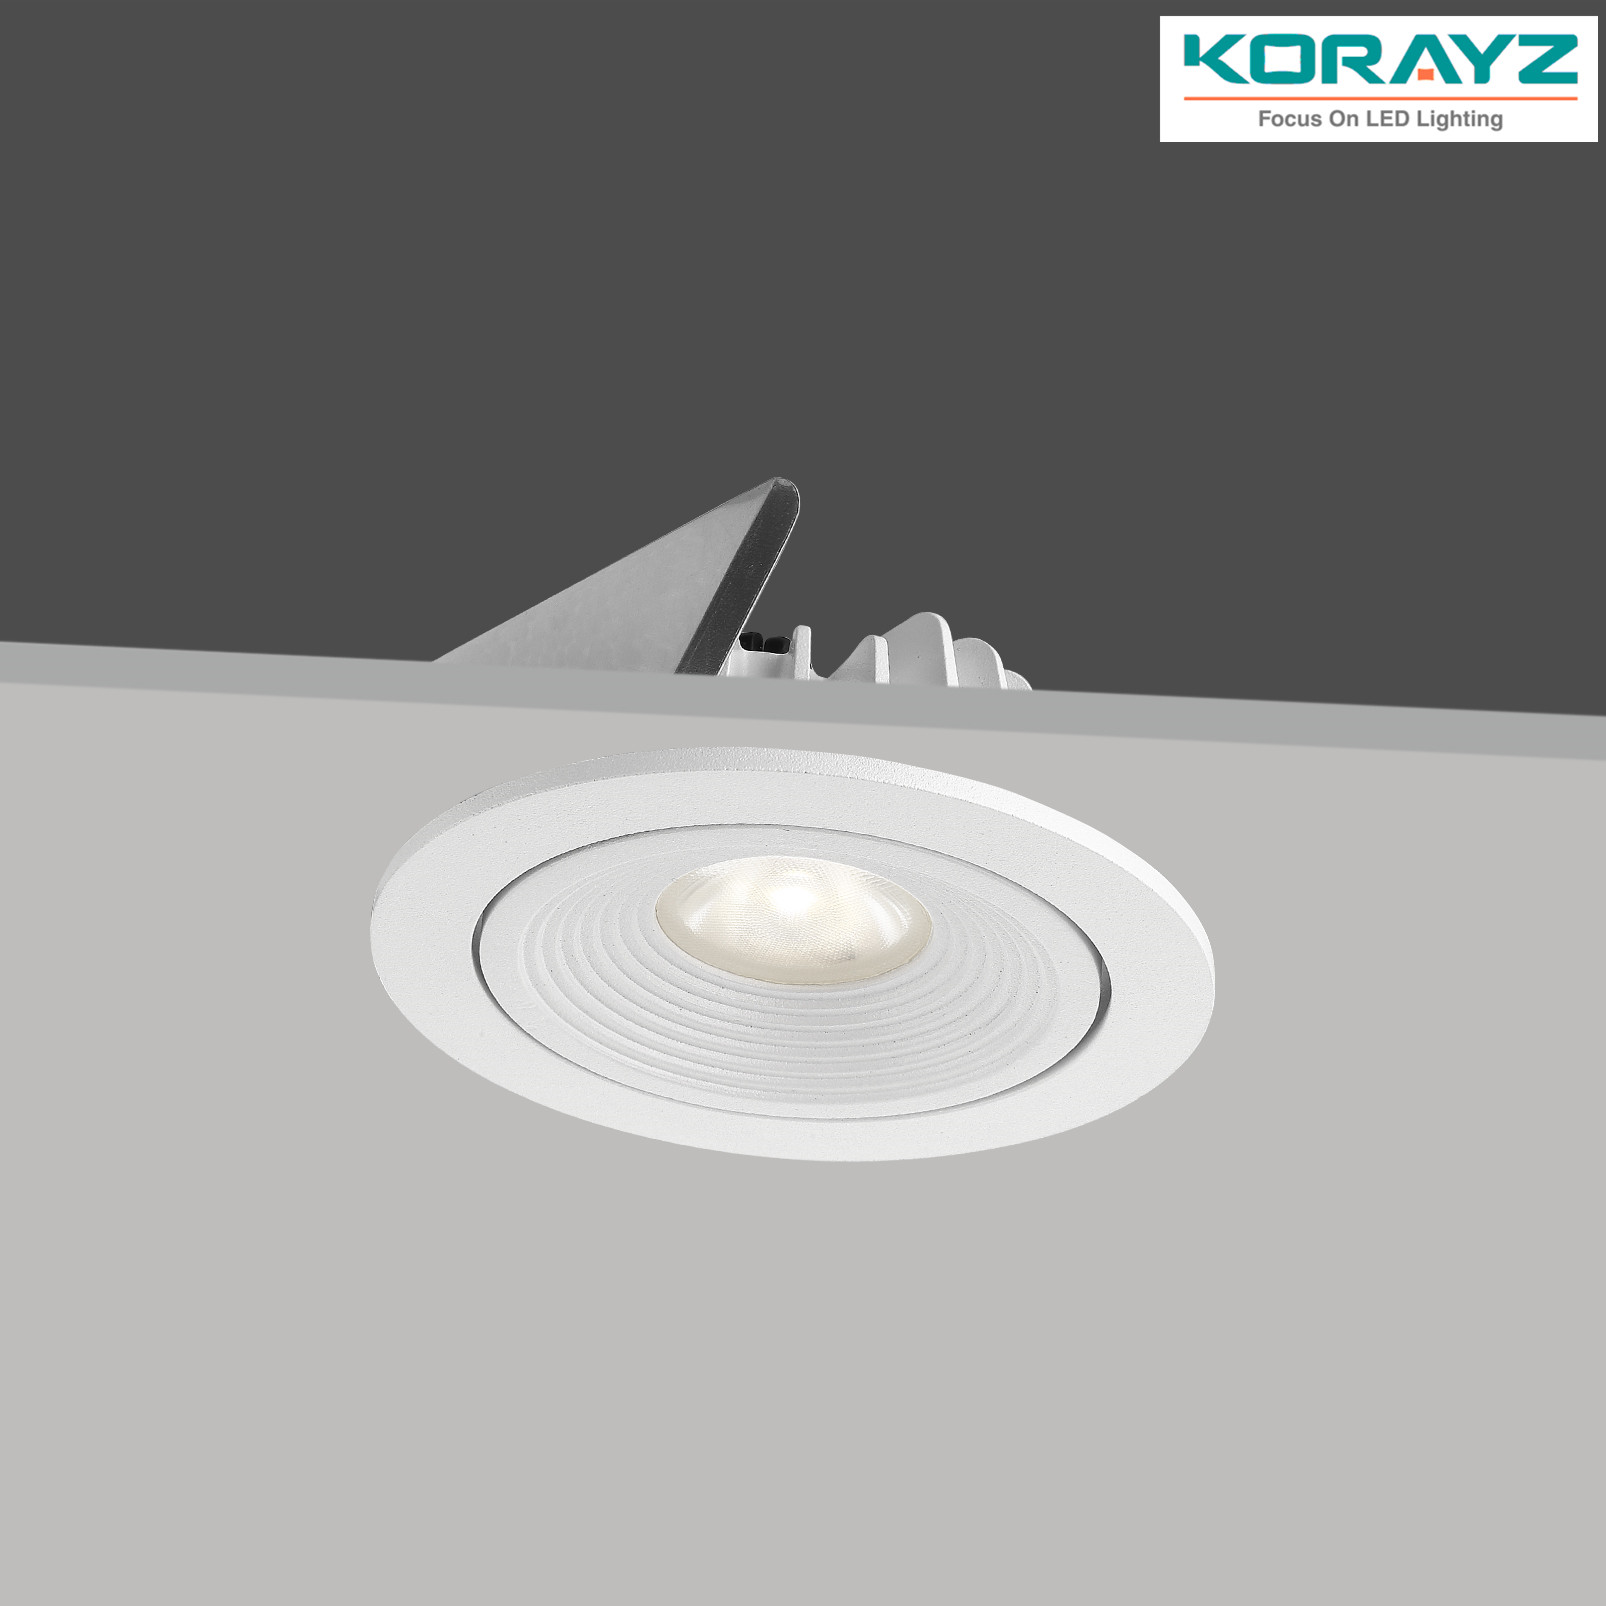 High quality modern design residentail led recessed downlight